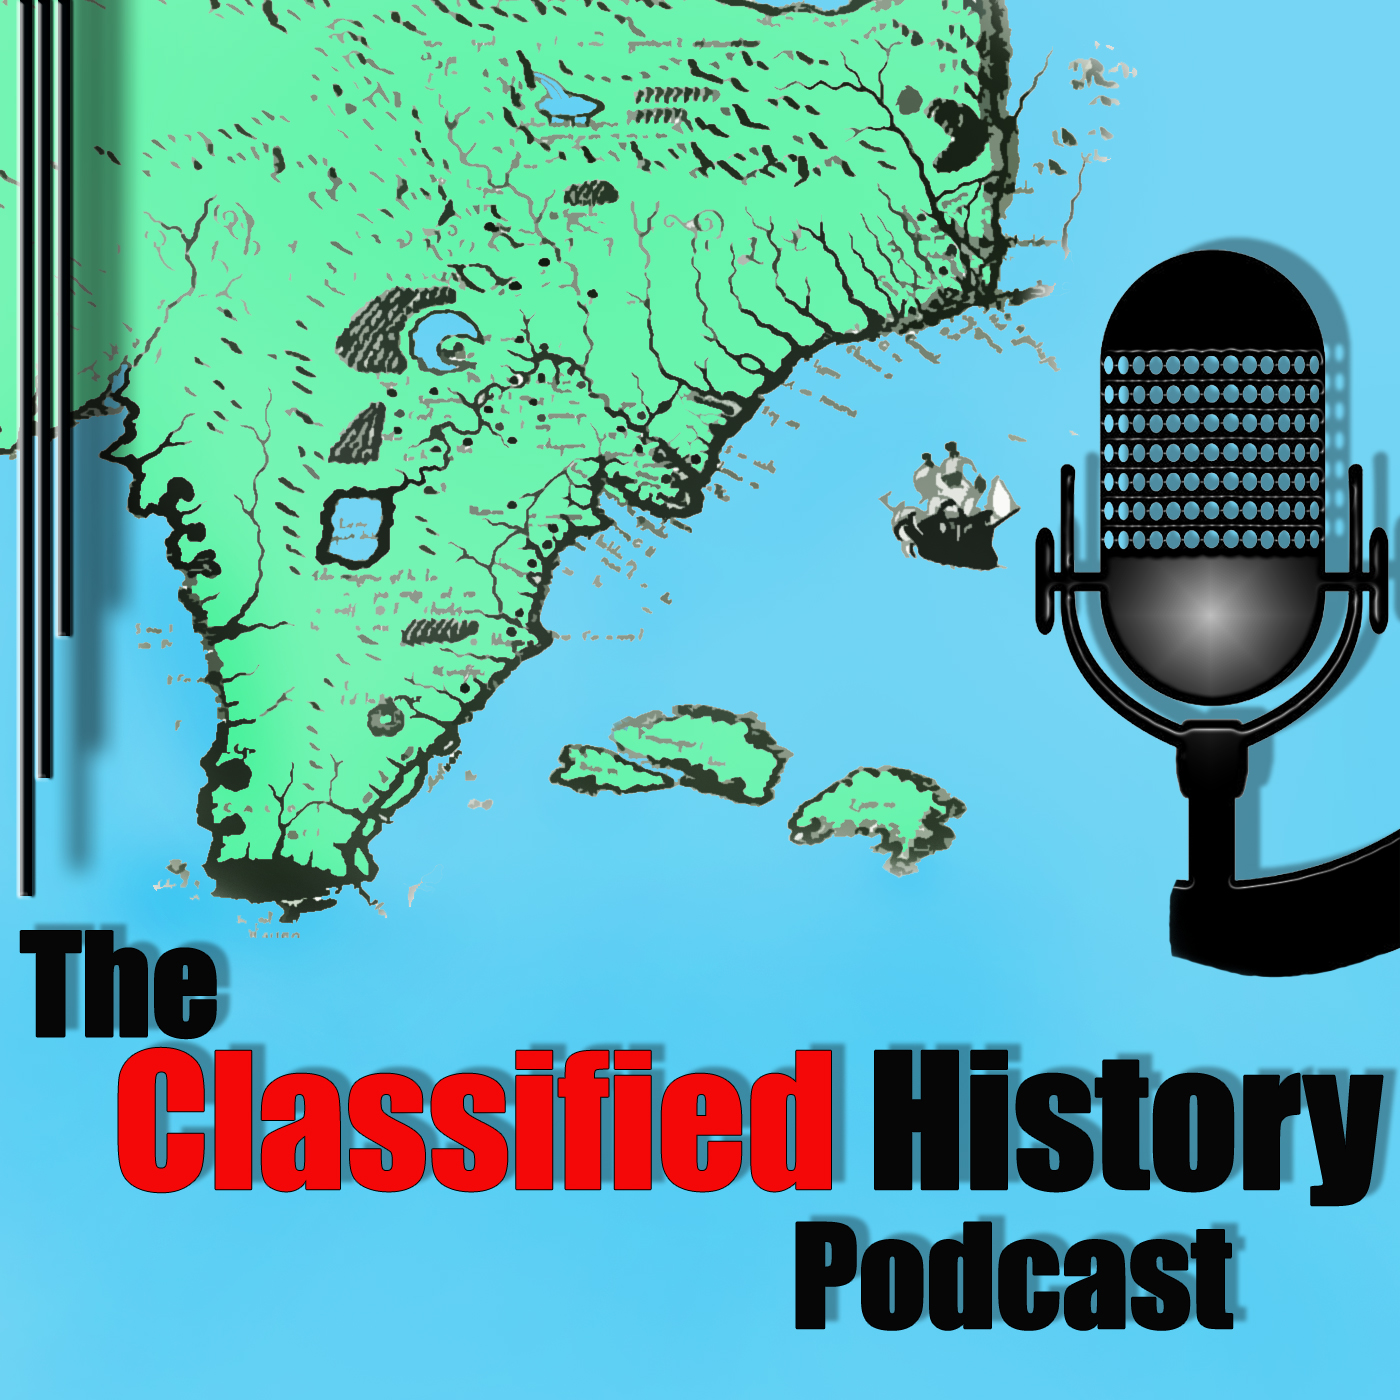 Micanopy is 200 Years Old ...... The Classified History Podcast